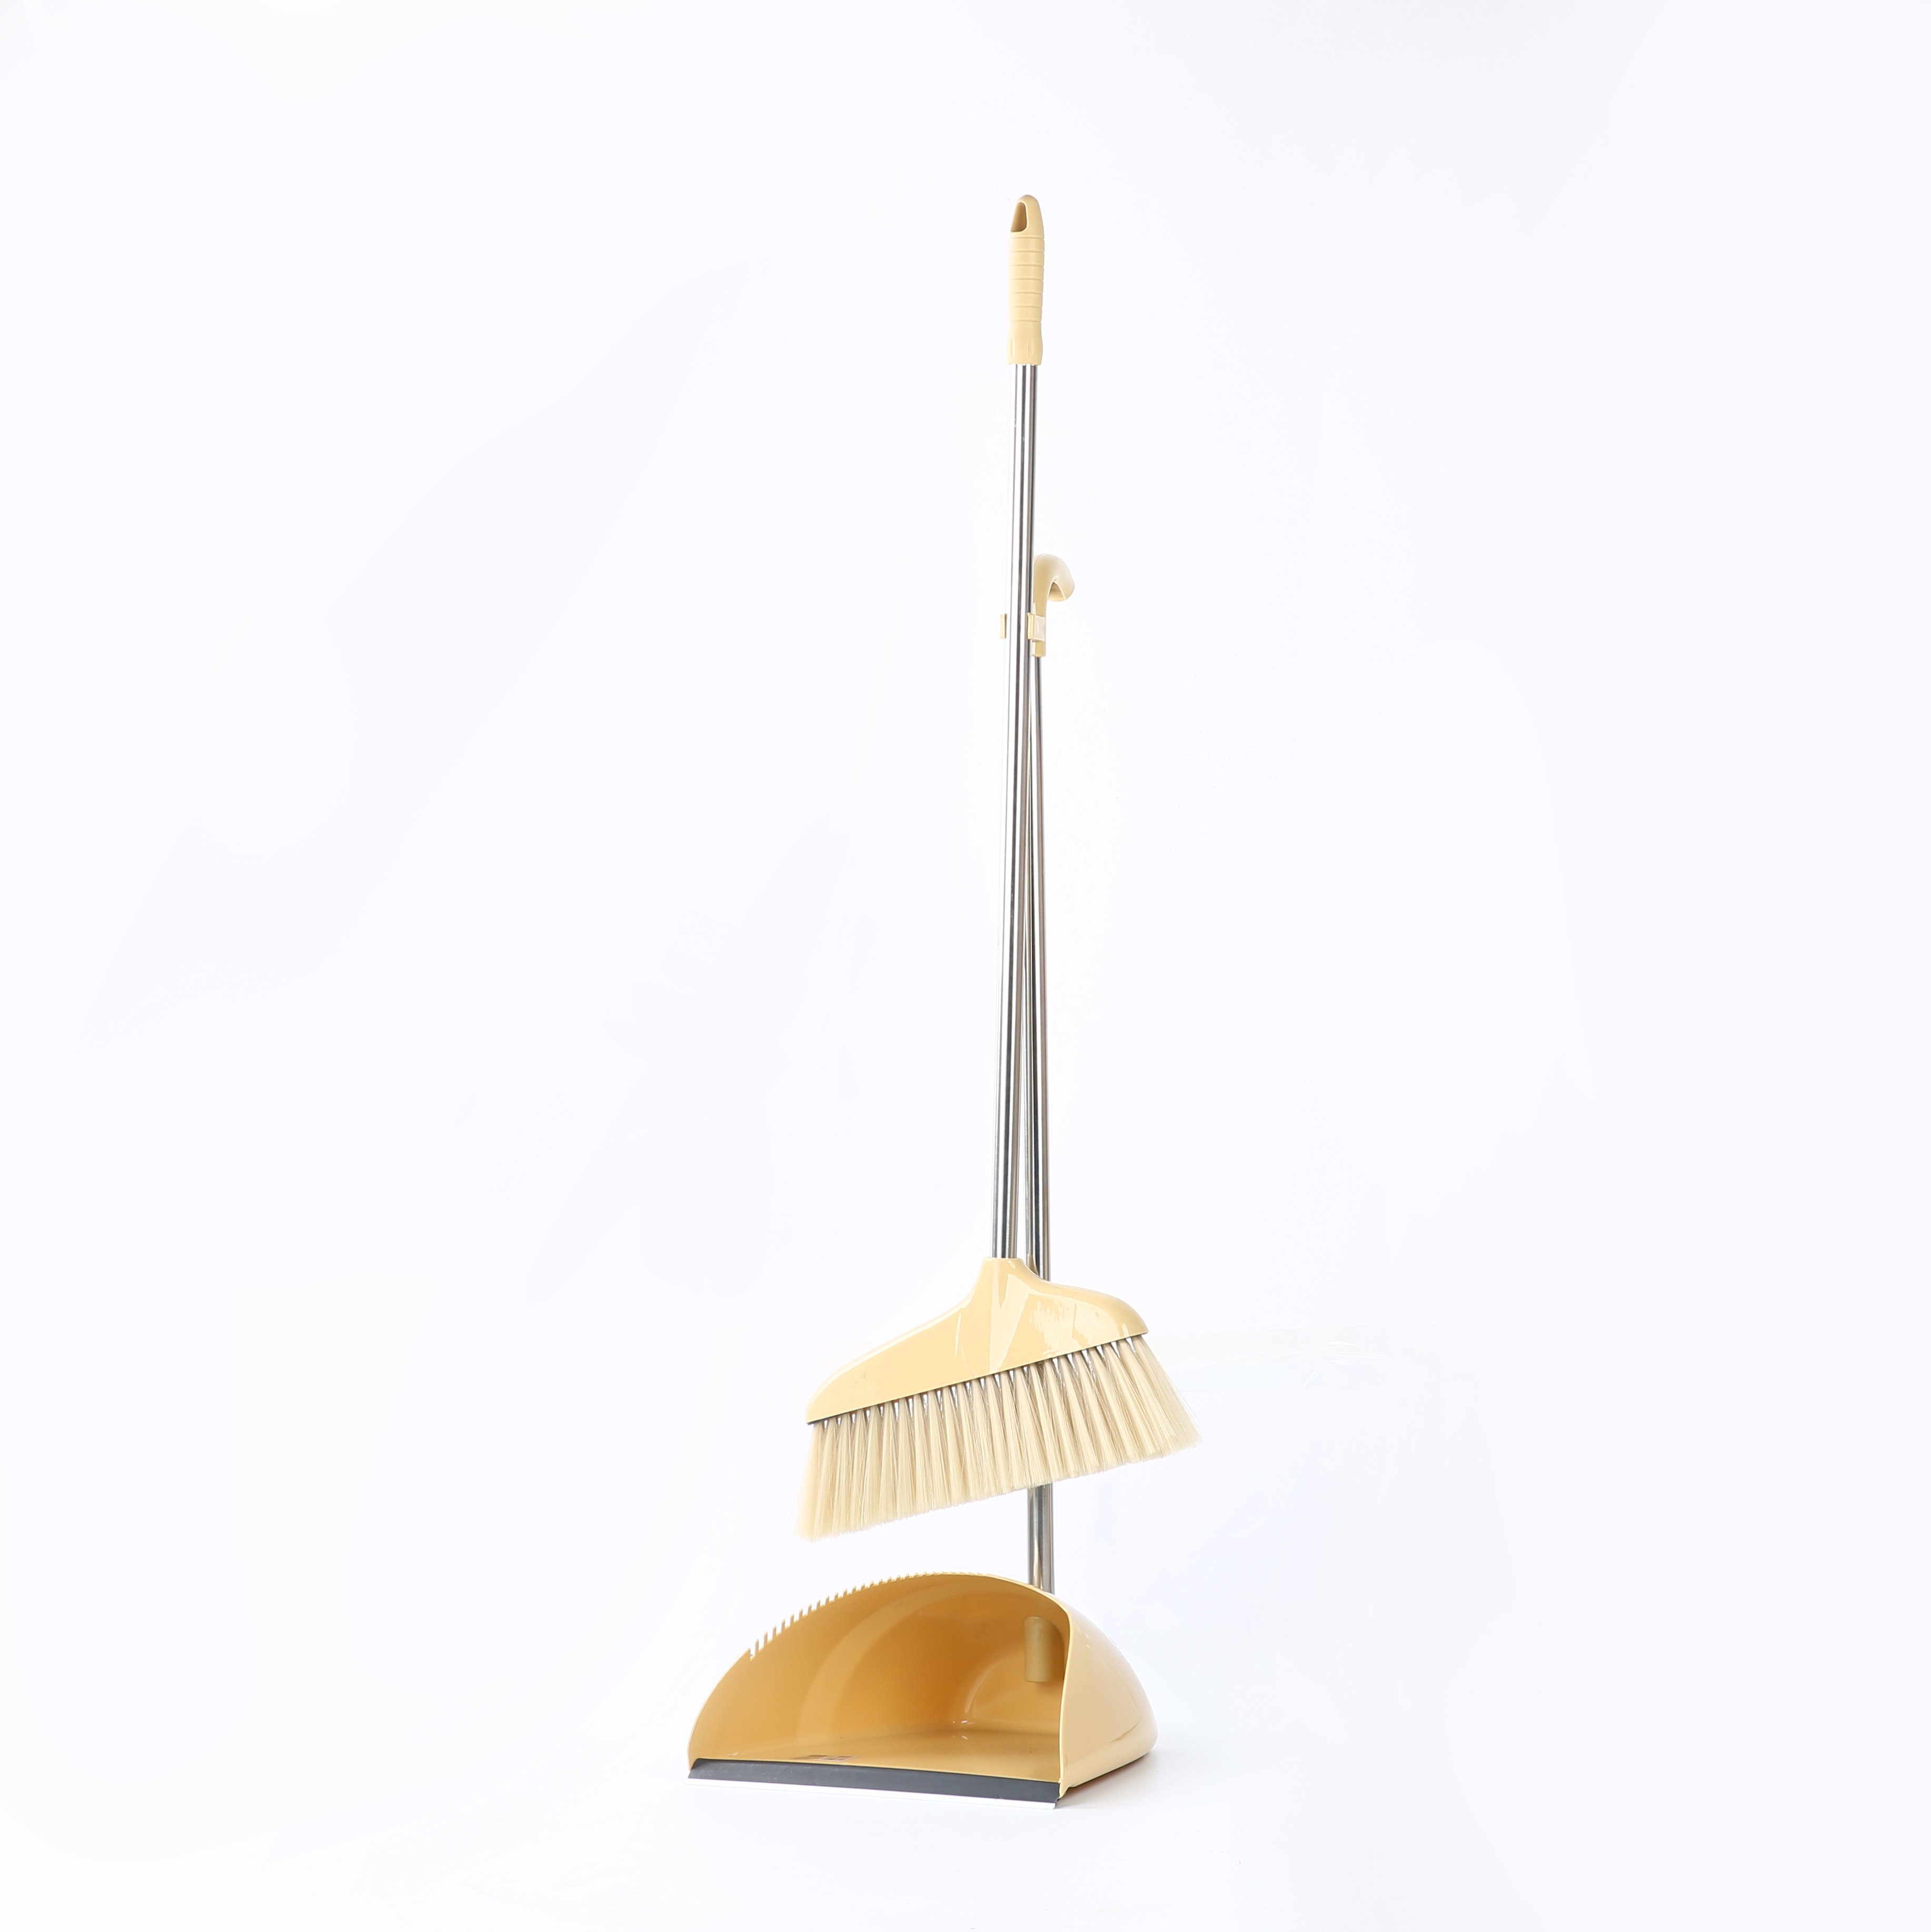 Hot sale recycle plastic road sweeper brushes broom and dustpan set Metis 9510